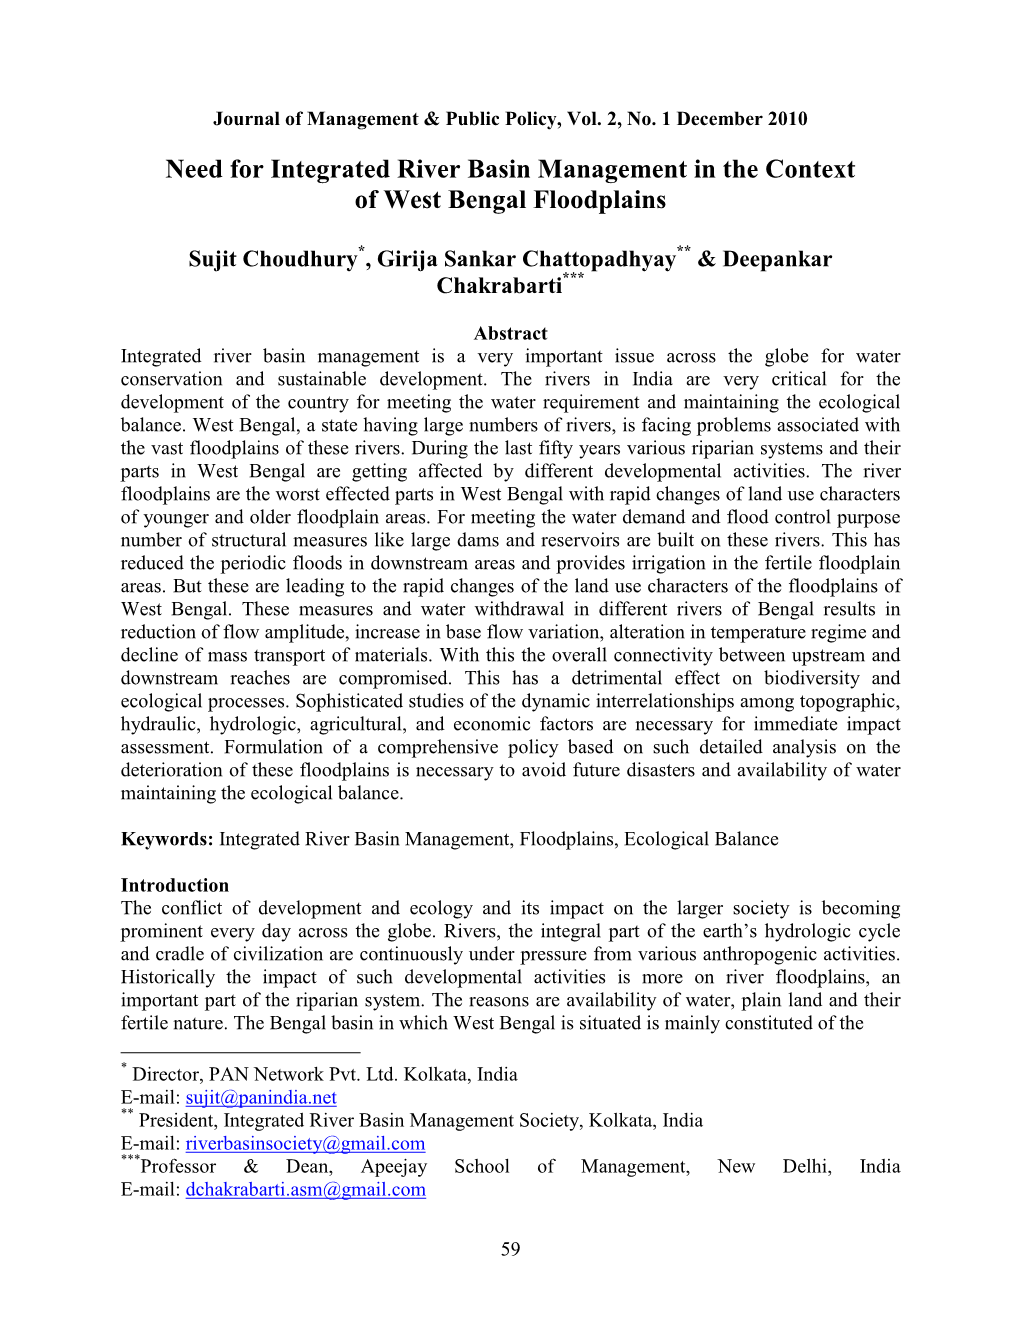 Need for Integrated River Basin Management in the Context of West Bengal Floodplains